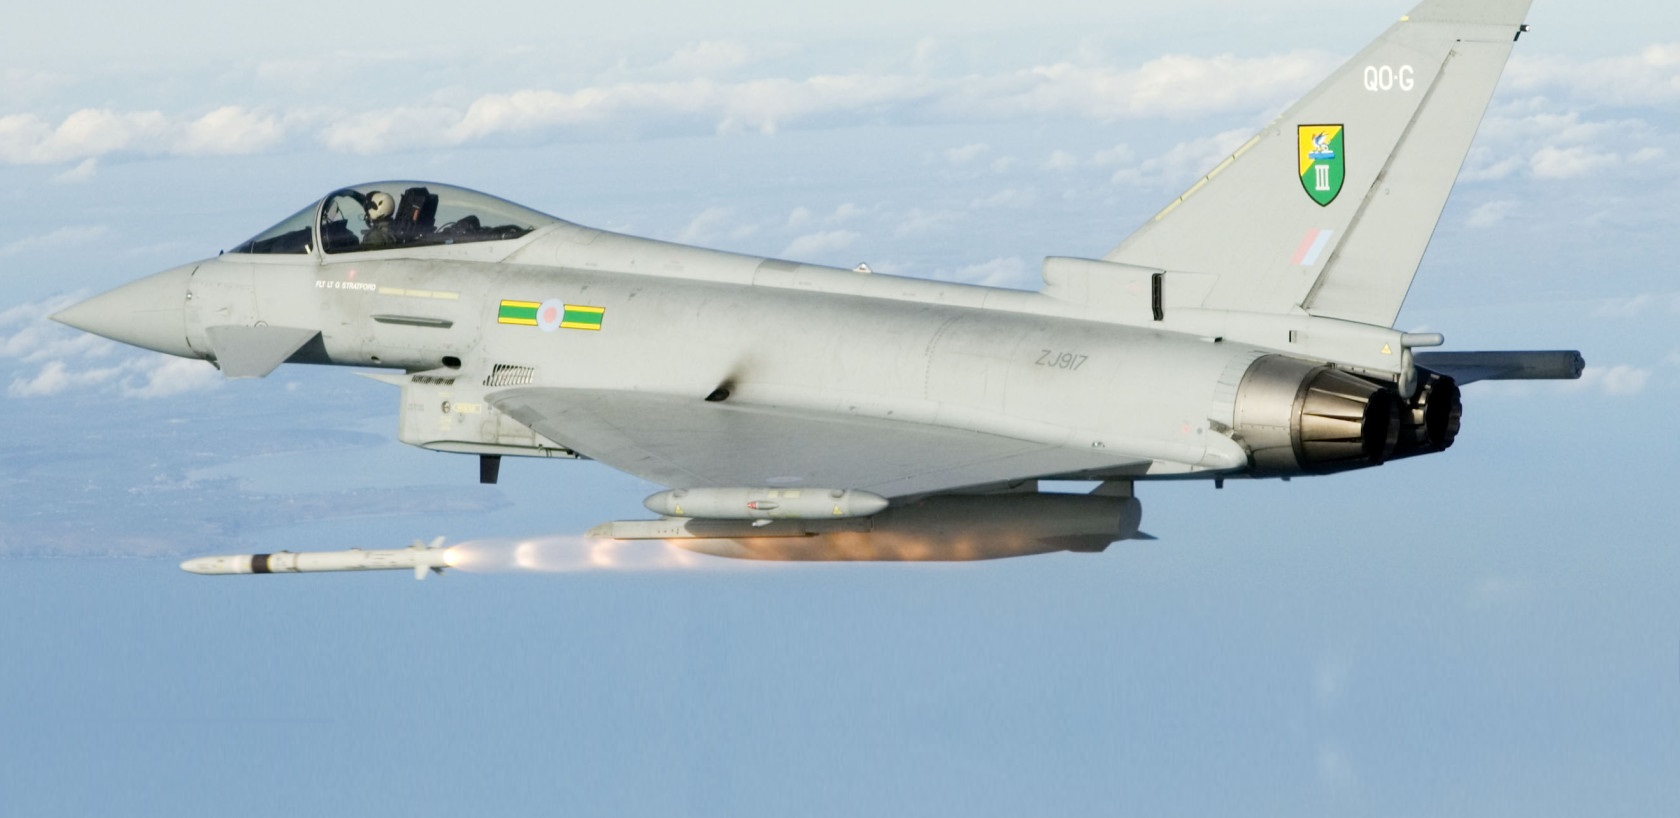 Eurofighter Typhoon based at RAF Coningsby, Lincoln, England firing a MBDA ASRAAM missile. The missile is fired against the flare pack towed by a Mirach target drone and was fired at the Aberporth range in Cardigan Bay, Wales. The Pilot firing the missile was Flt Lt B Cooper of 3(F) Squadron and the chase aircaft was flown by Flt Lt Sally Cronin of 100 Squadron RAF Leeming.